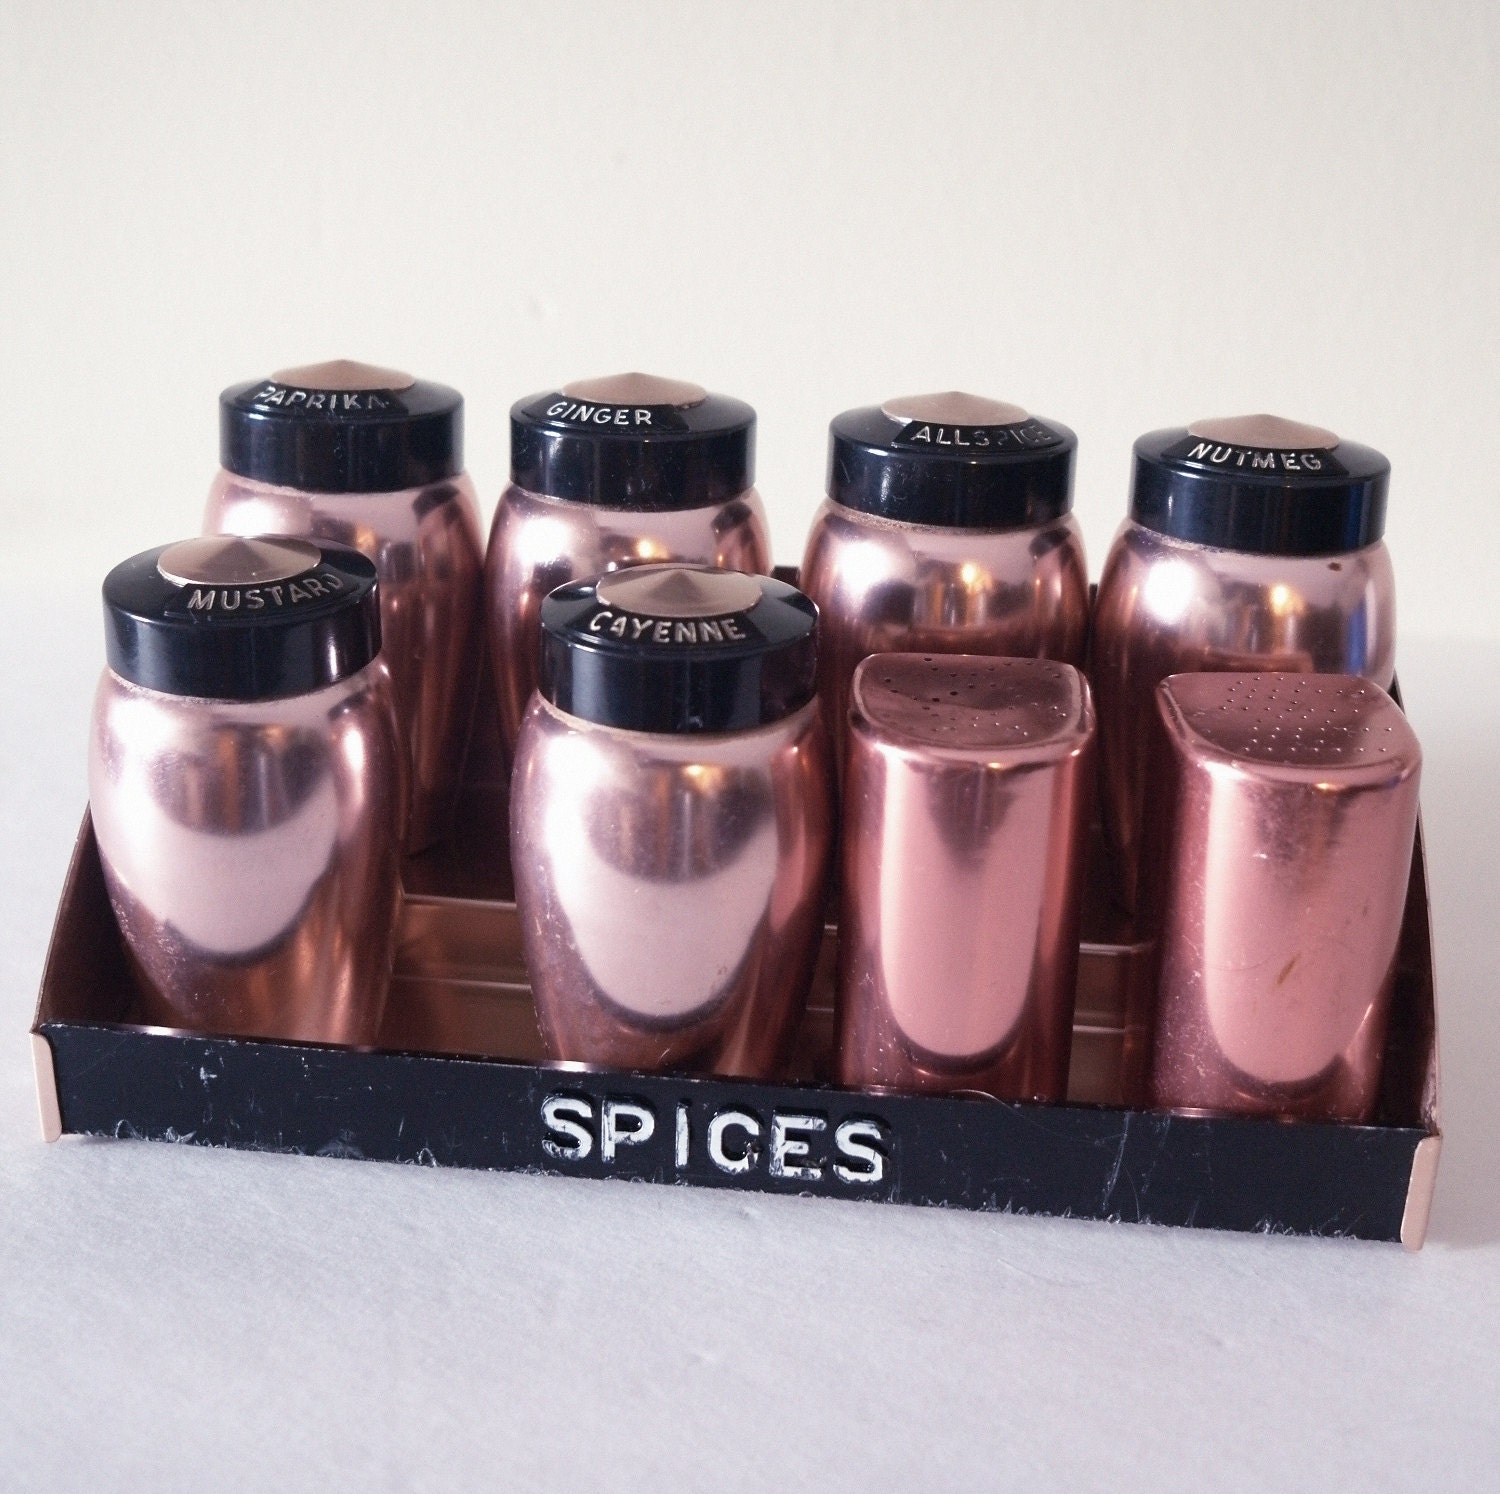 Save 15% in Feb. code: HEARTS - Vintage Kromex anodized aluminum spice rack set pink